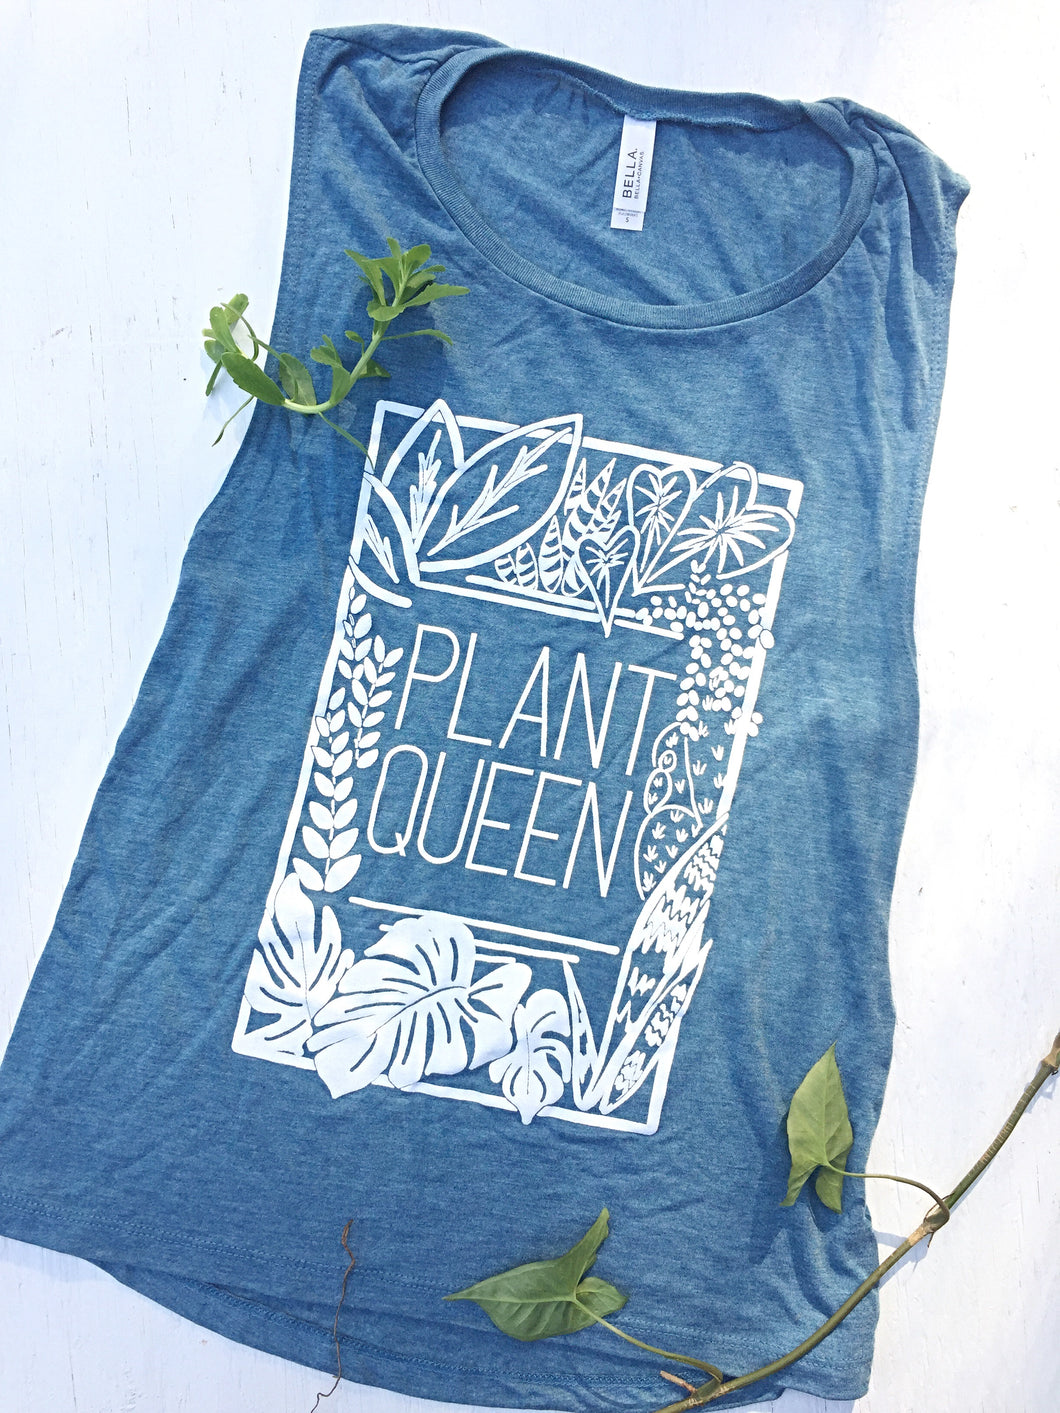 Plant Queen Teal Tank